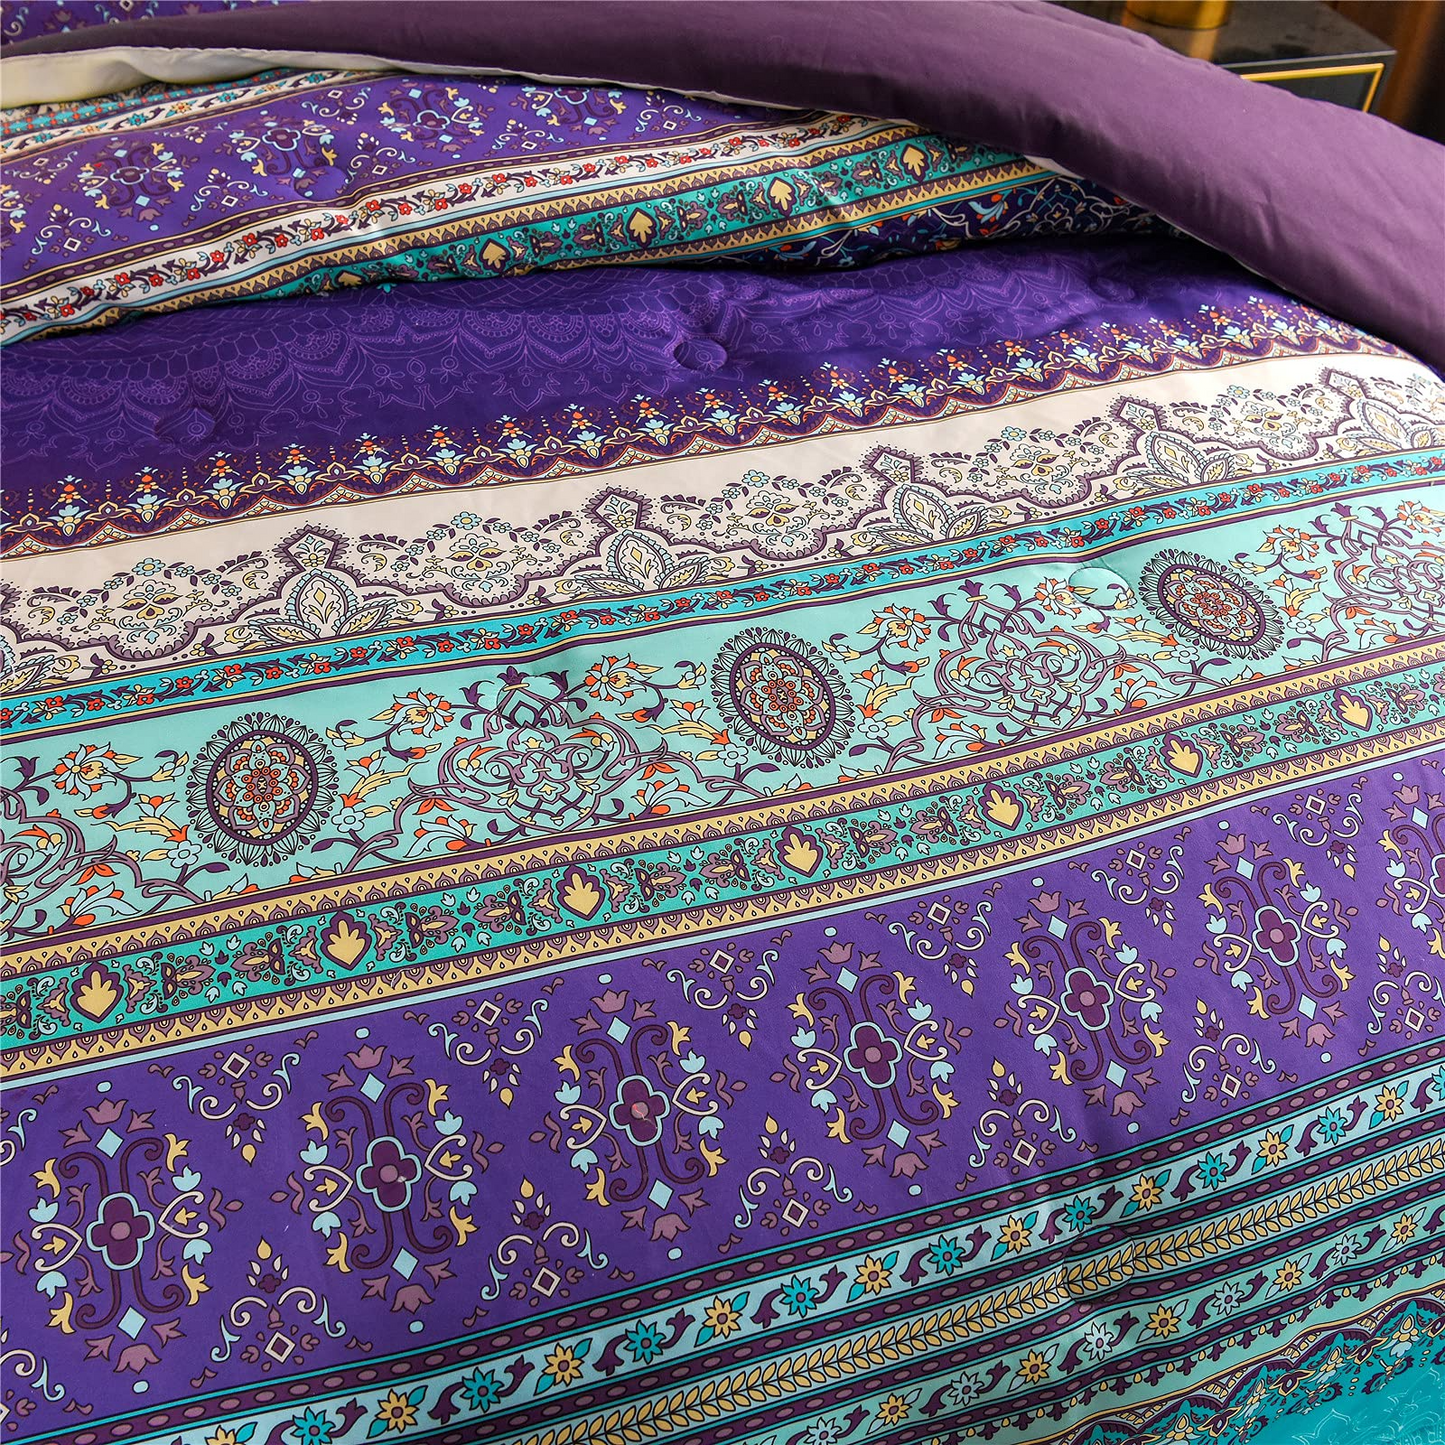 Bohemian Purple Printed Comforter Set 3 Pieces Bedding Set With 2 Pillowcases